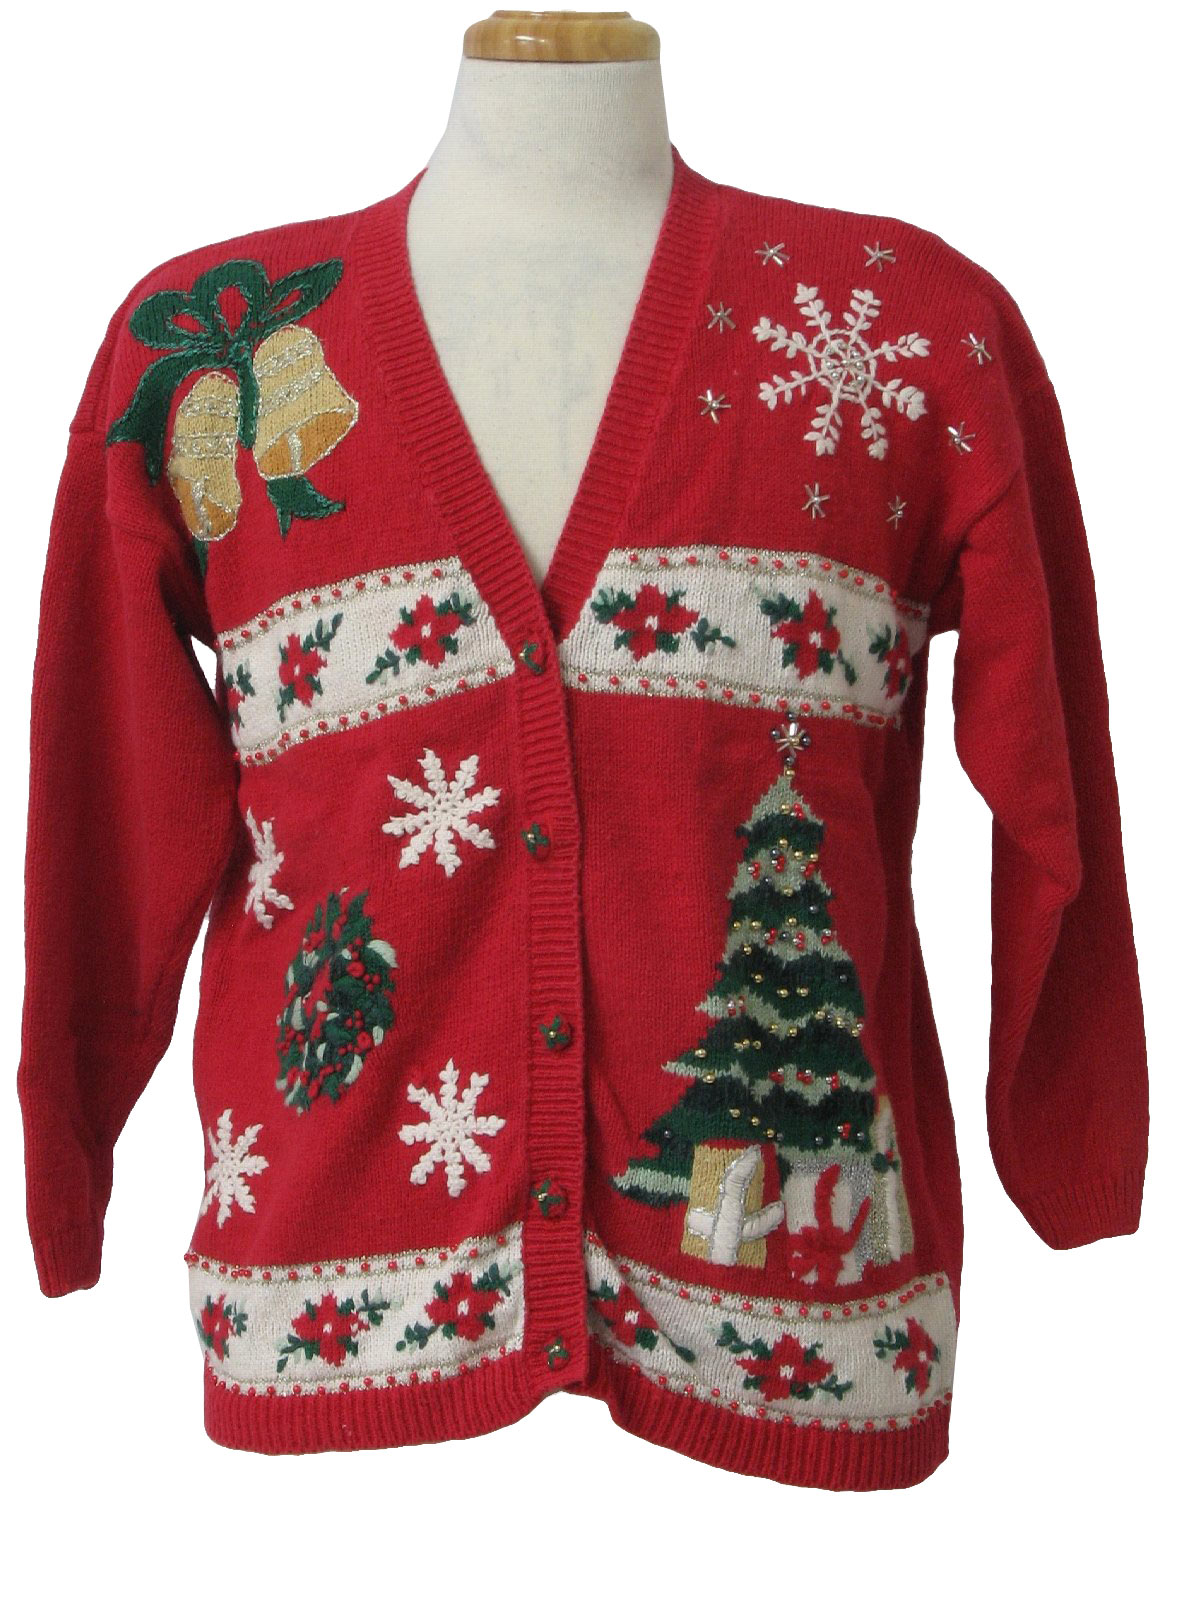 Womens Ugly Christmas Cardigan Sweater : -Carly St. Claire- Womens red ...